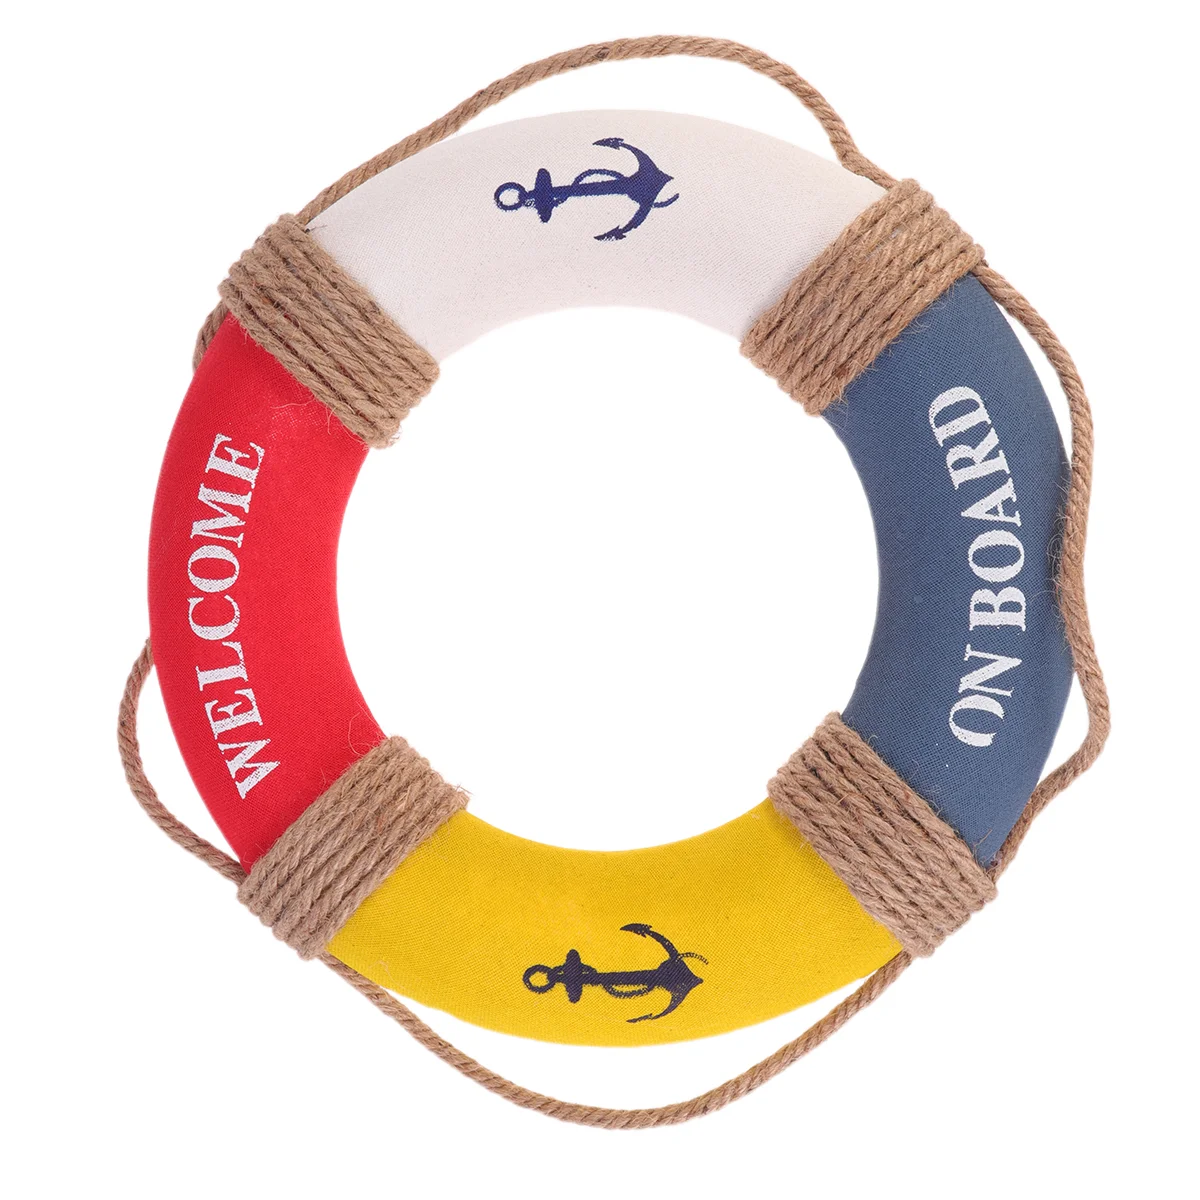 

Nautical Life Rings Buoy Welcome on Board Life Ring Nautical Wall Ornaments Beach Coastal Wall Decor Nautical Gifts for Office